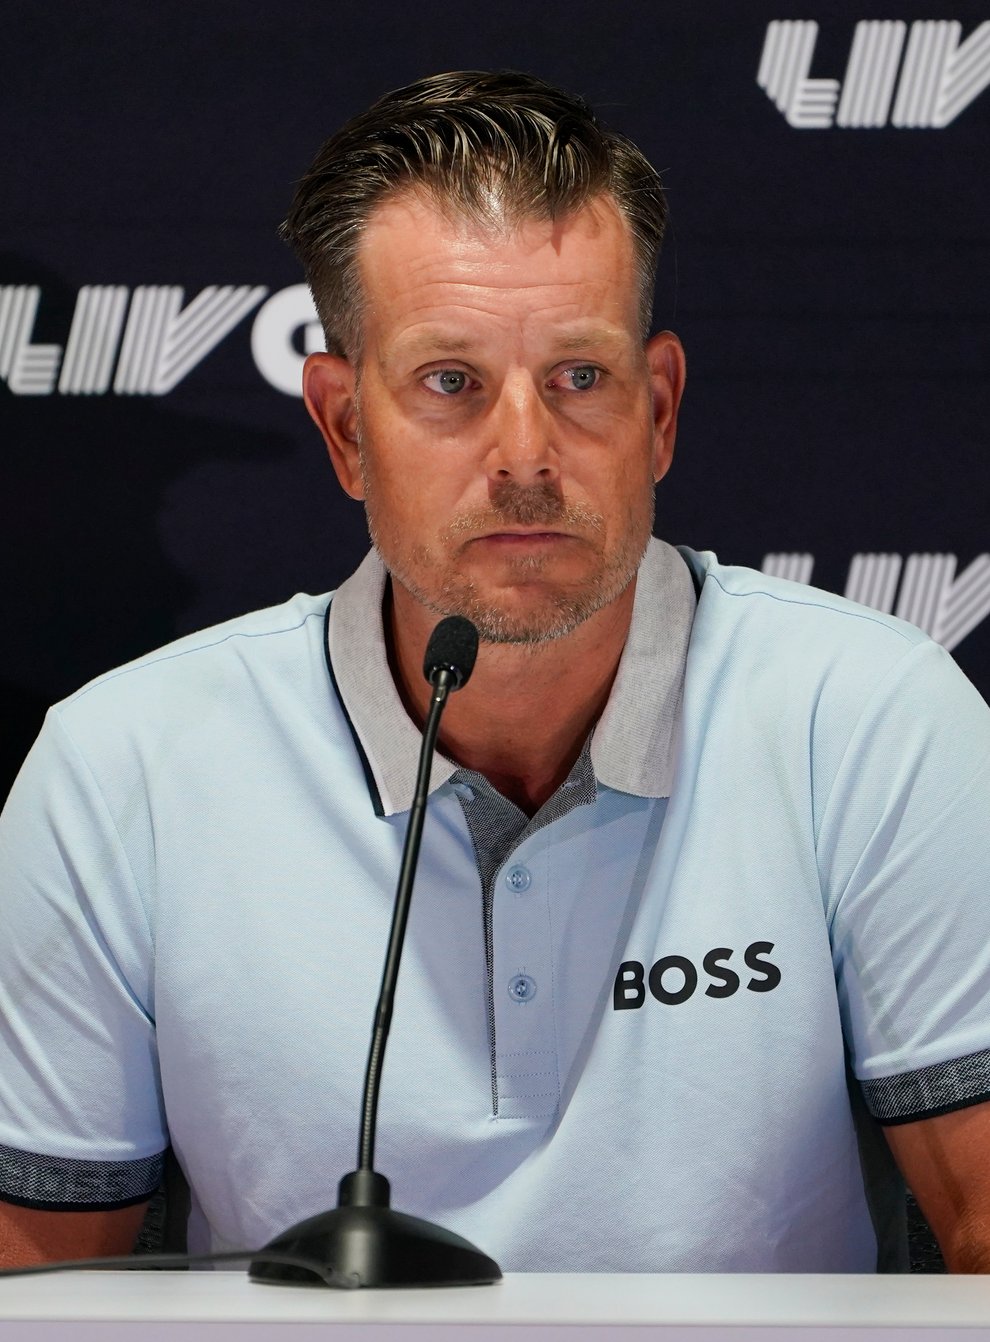 Henrik Stenson has reiterated his disappointment at losing the Ryder Cup captaincy due to joining LIV Golf (Seth Wenig/AP)